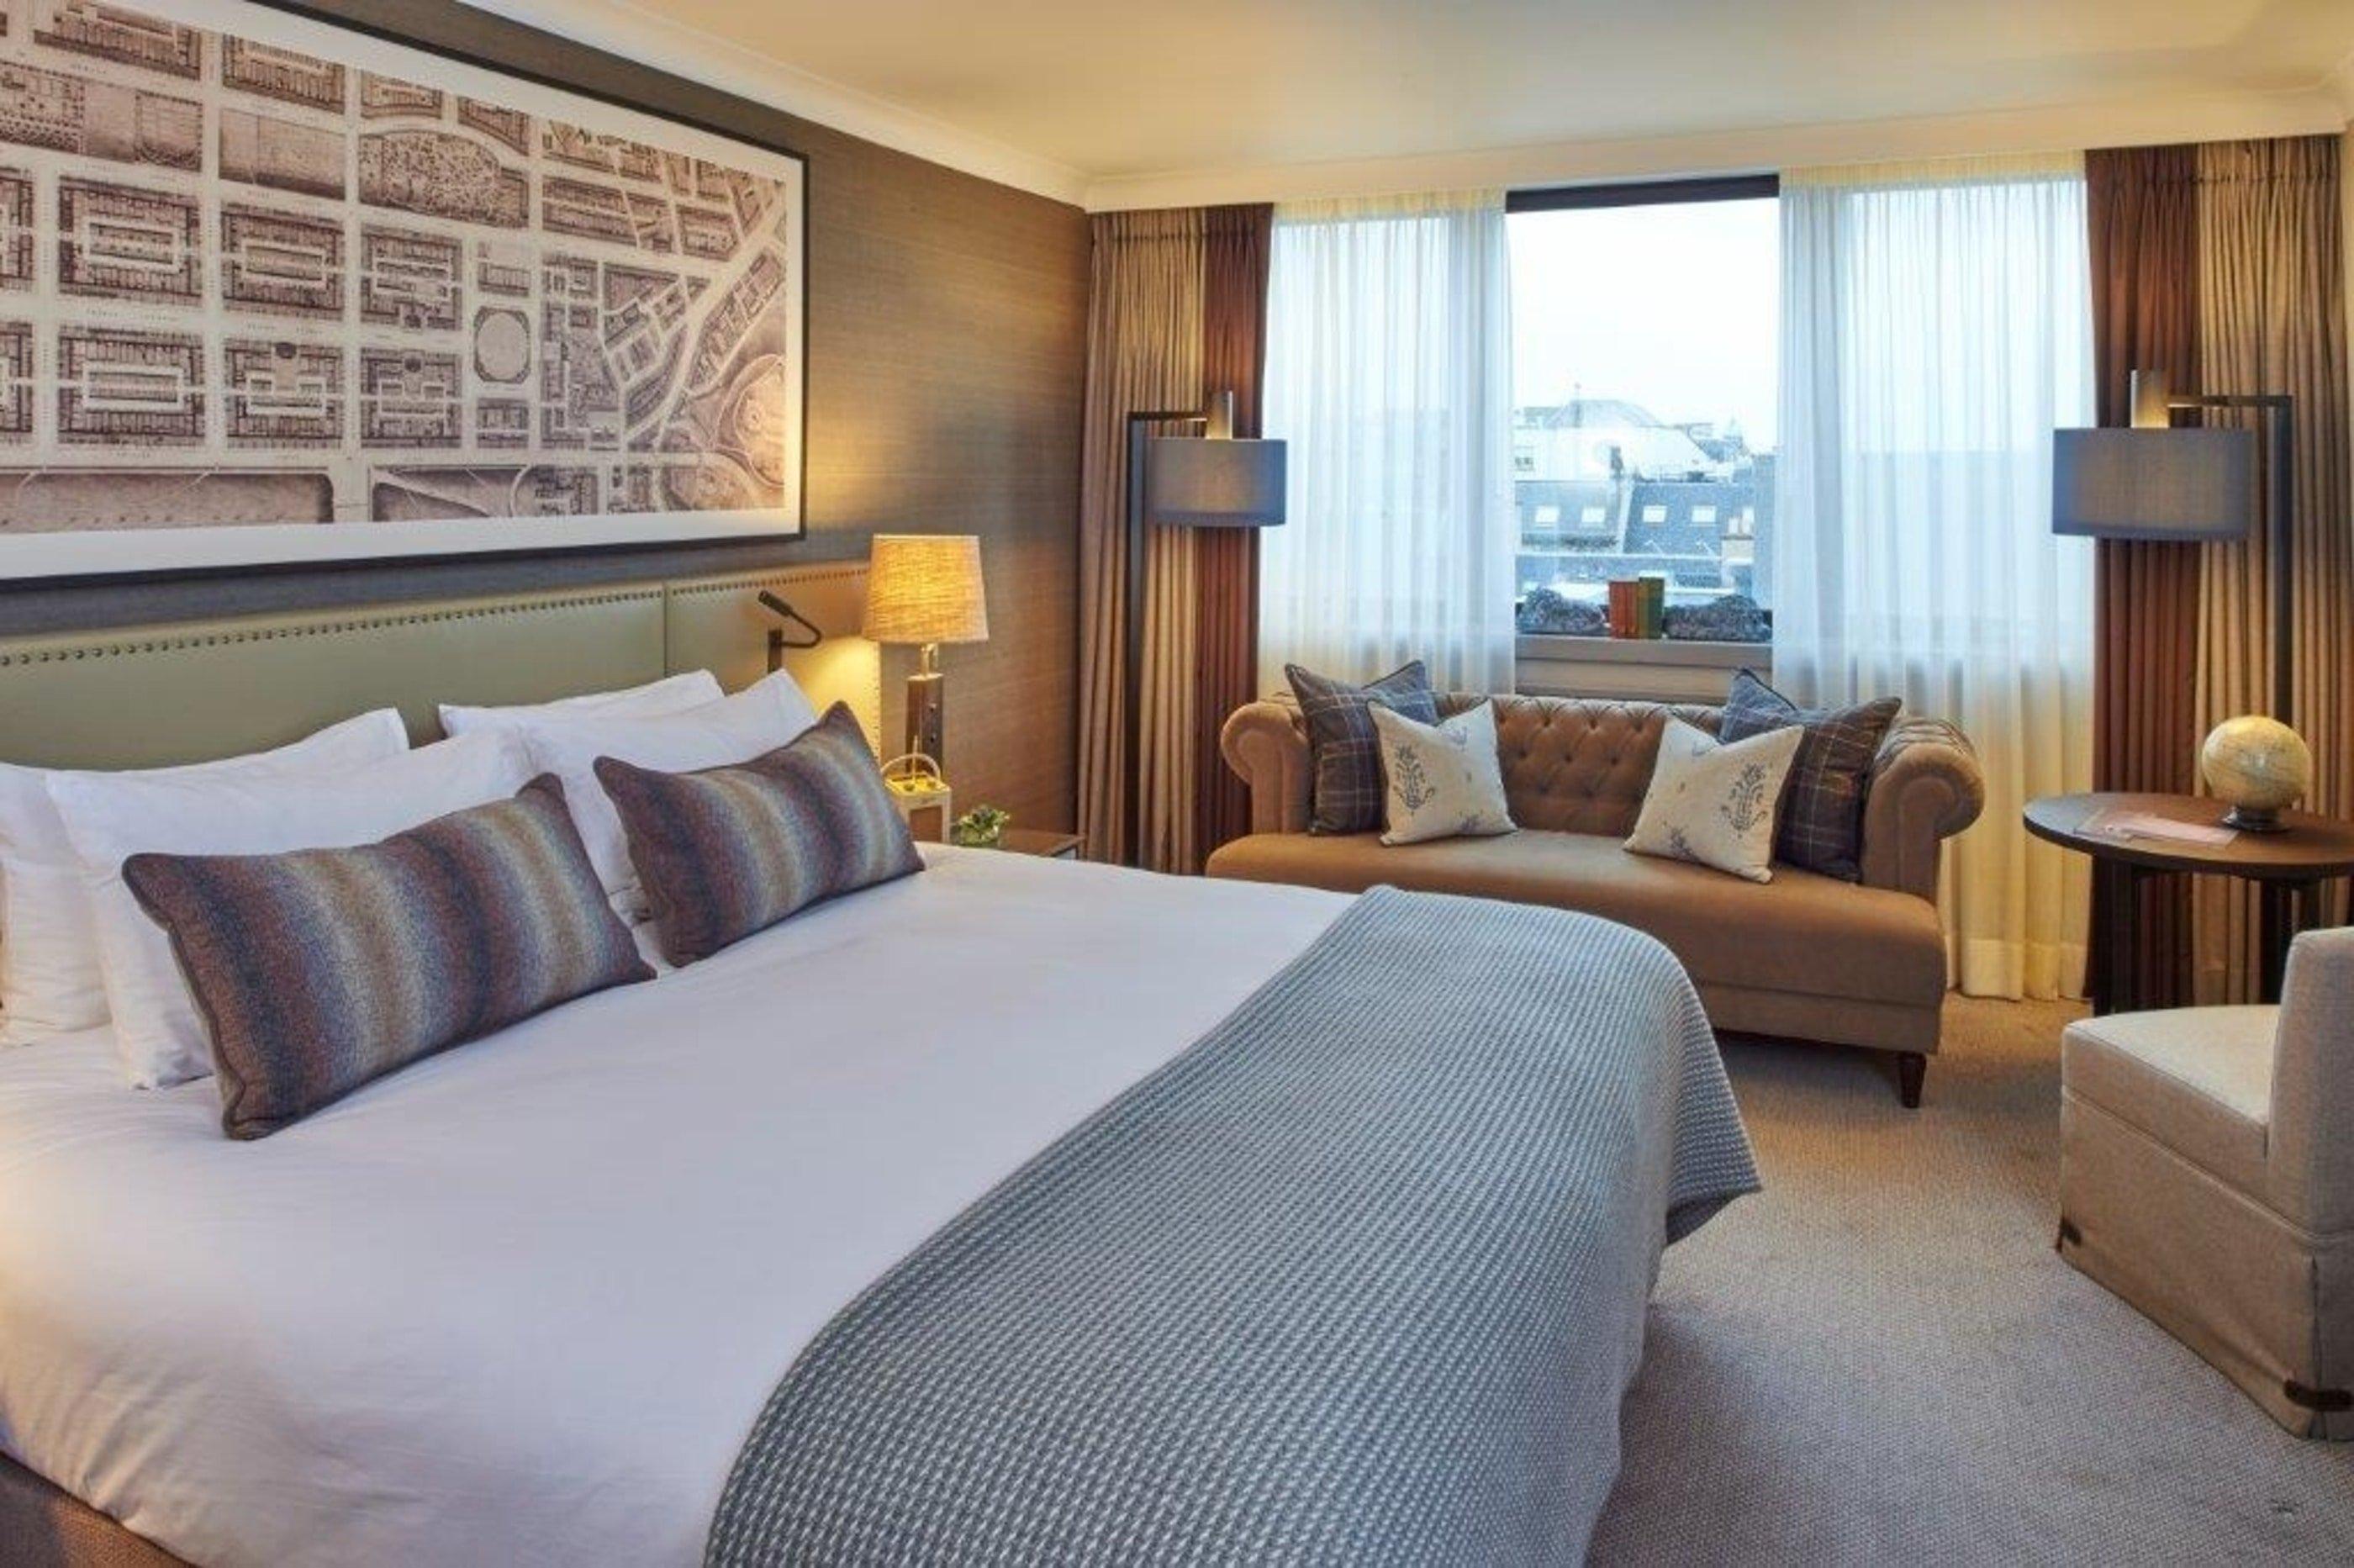 Deluxe rooms have king size beds with generous amounts of space.